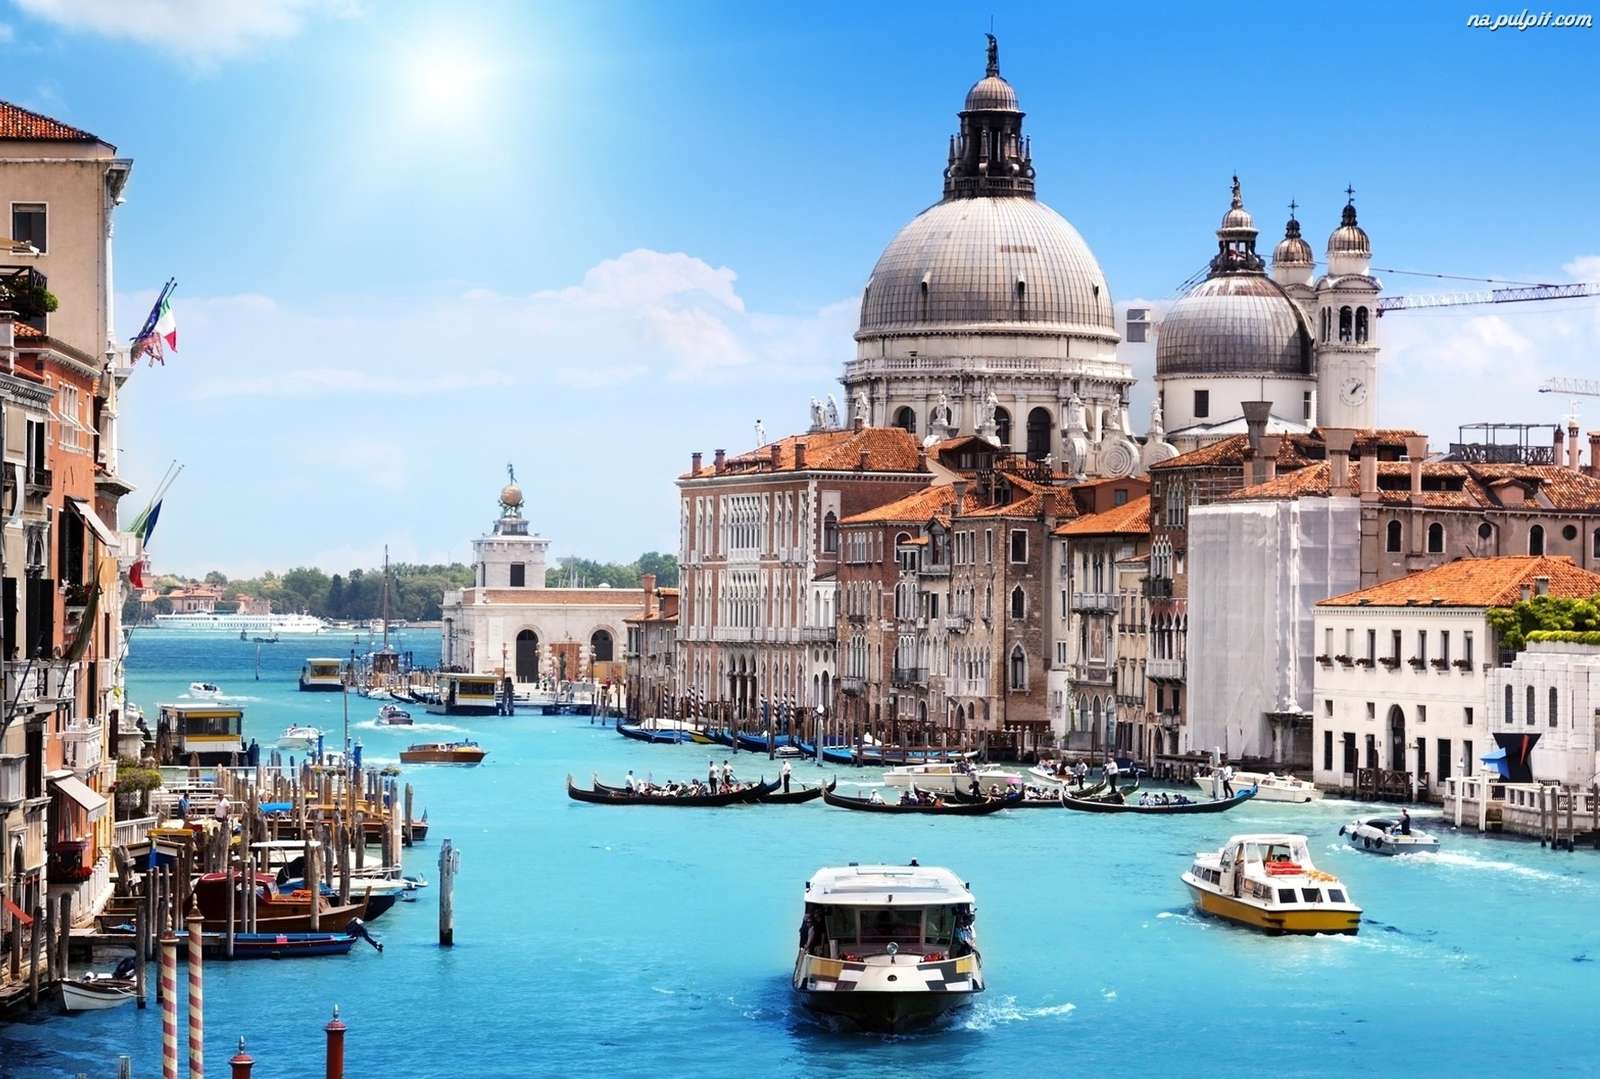 Venice, Italy jigsaw puzzle online